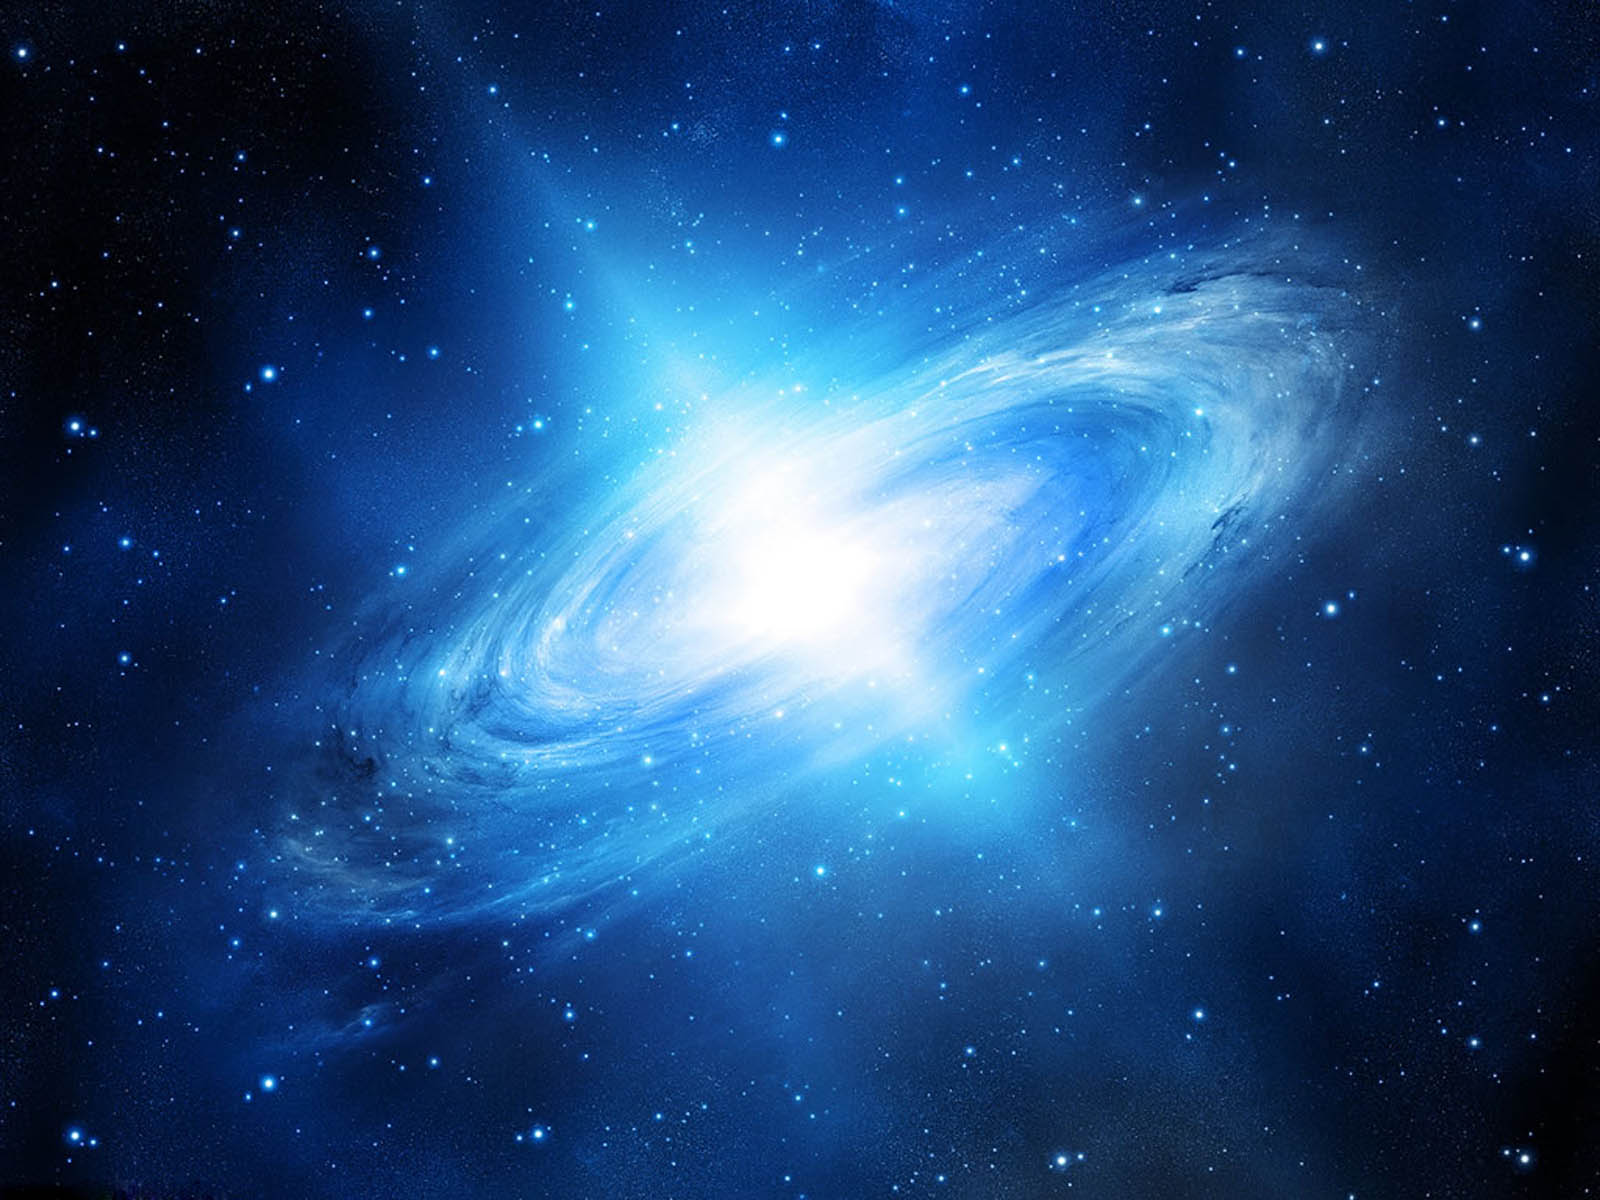  Space Wallpapers Images Photos Pictures and Backgrounds for free